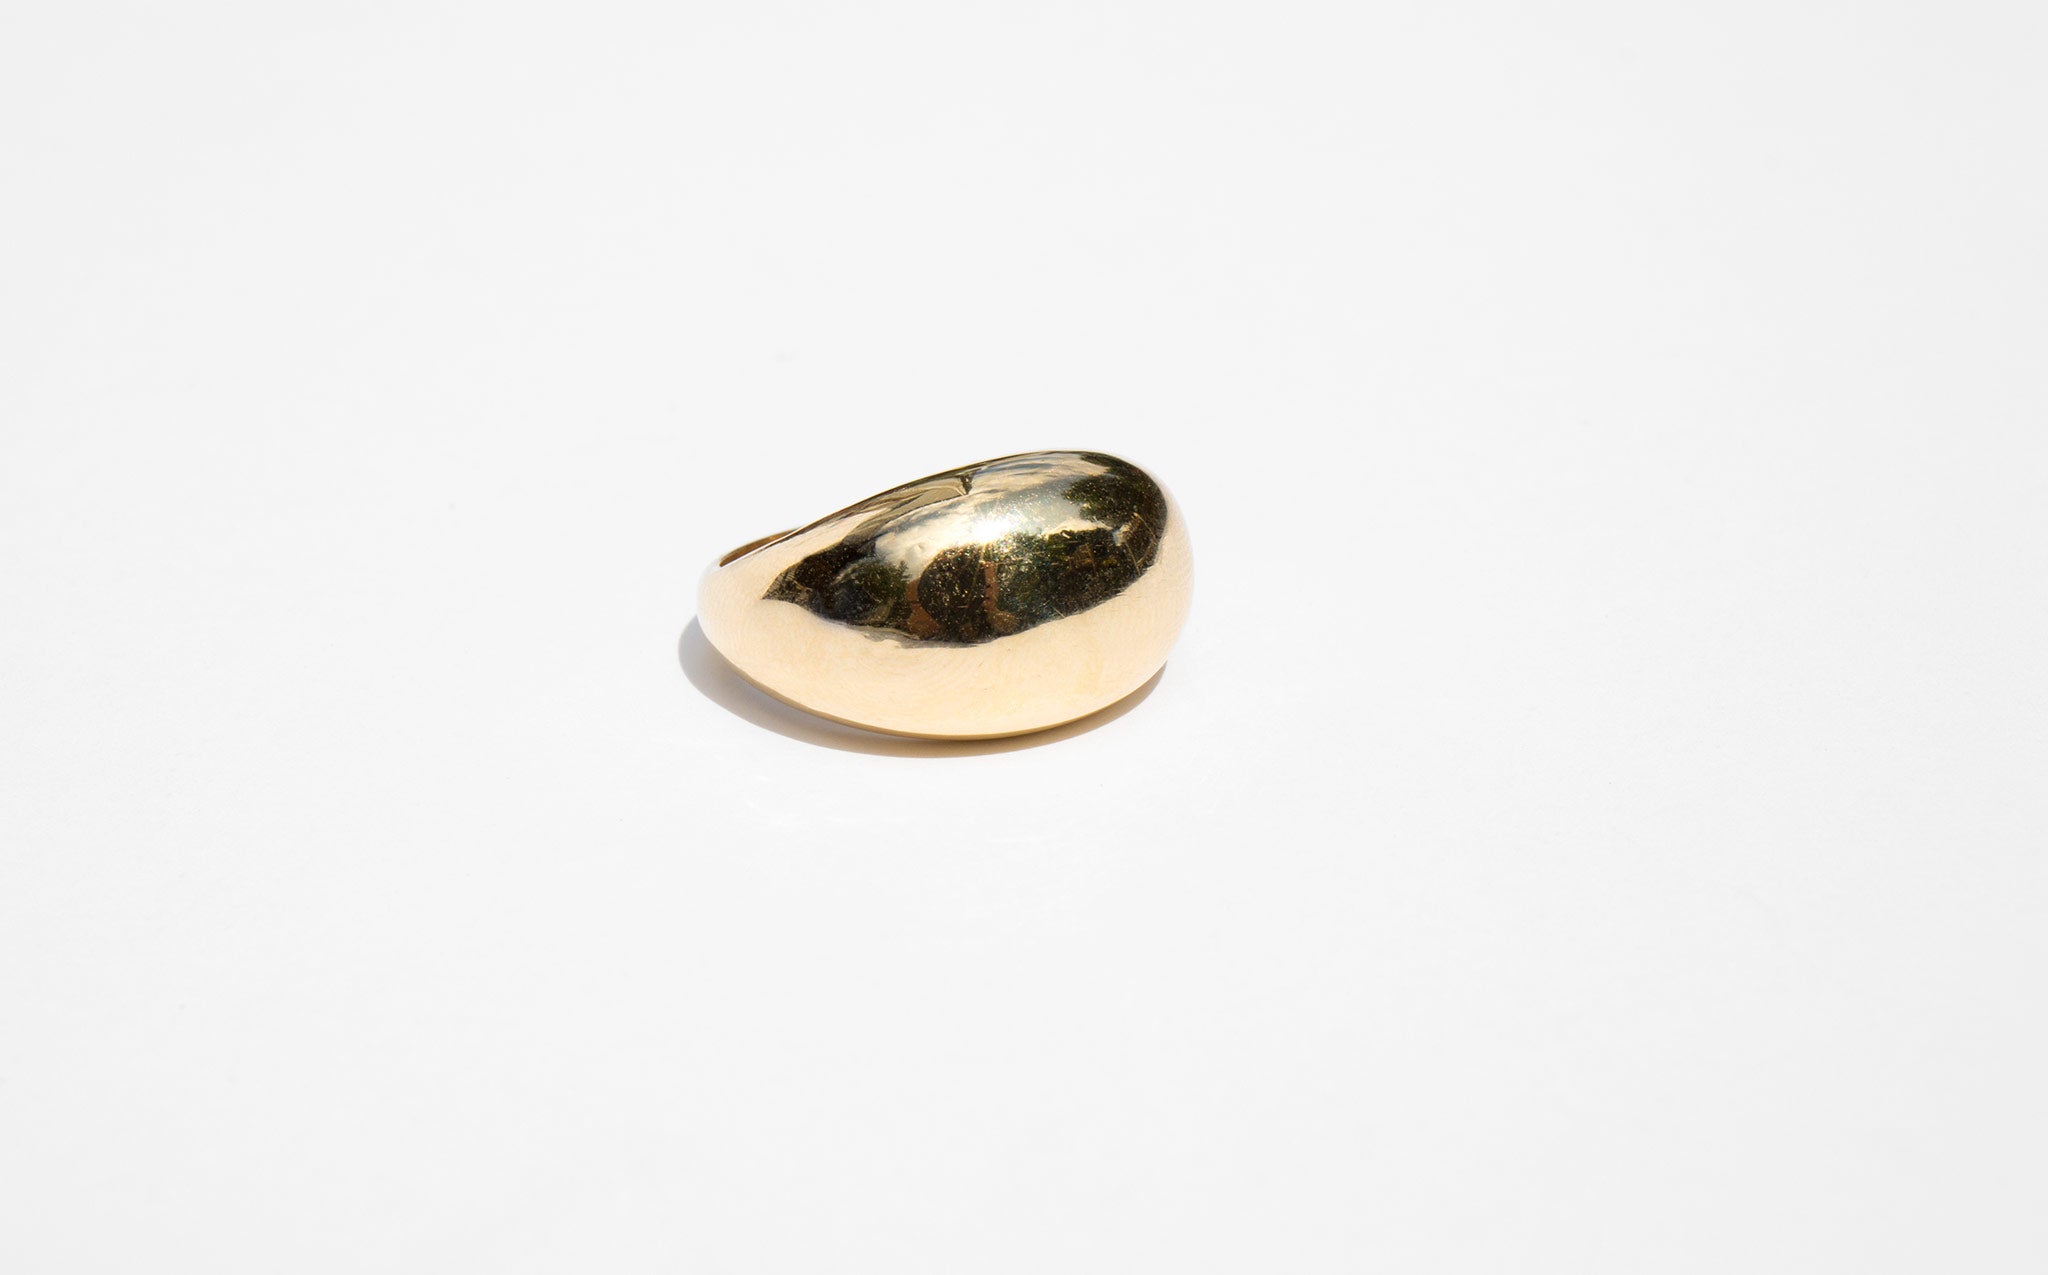 Vaulted Gold Ring